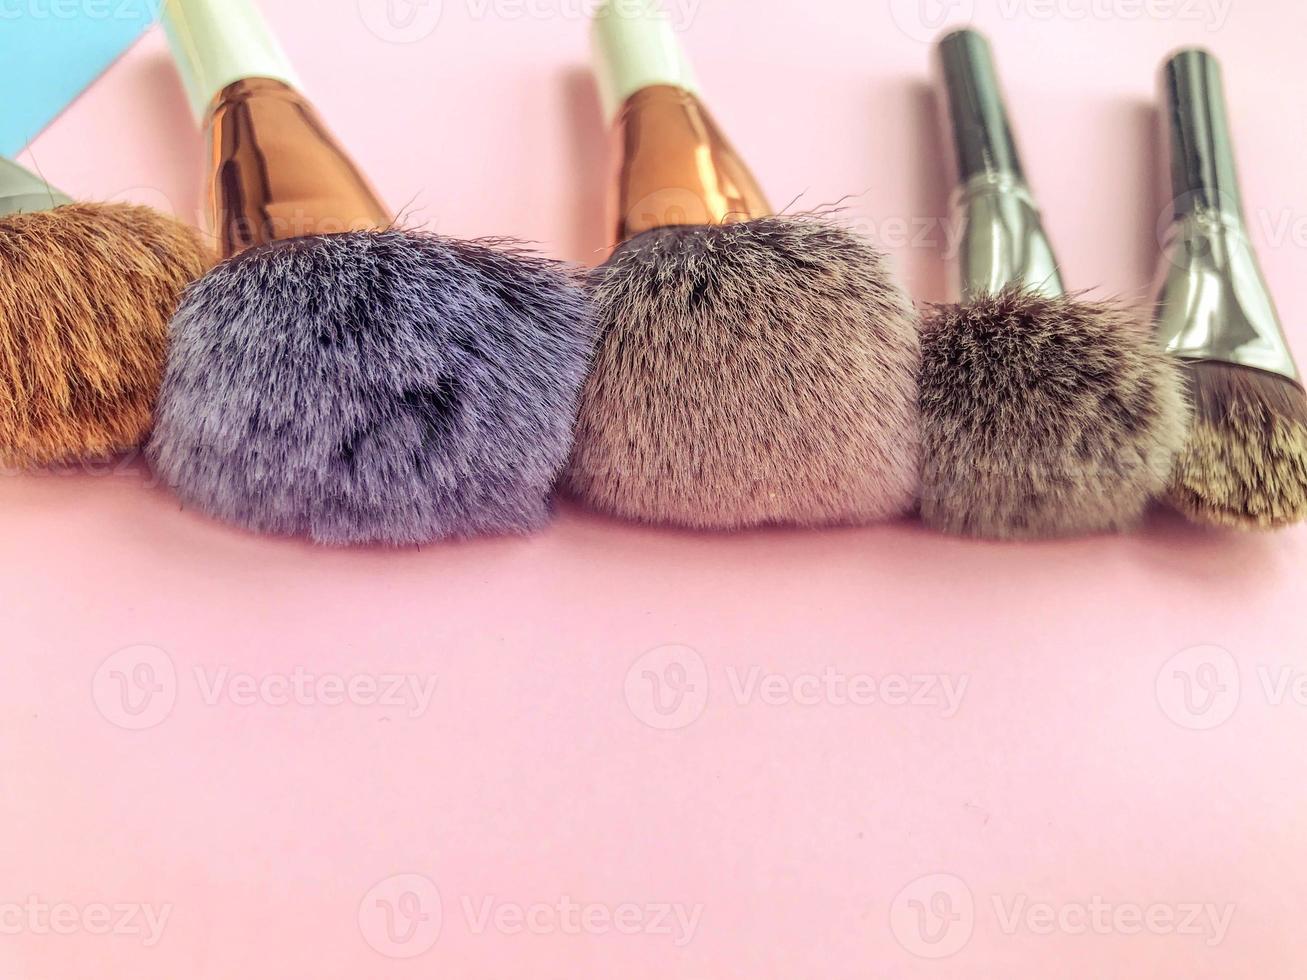 Set of different makeup brushes, makeup tools on pastel blue and beige pink background photo